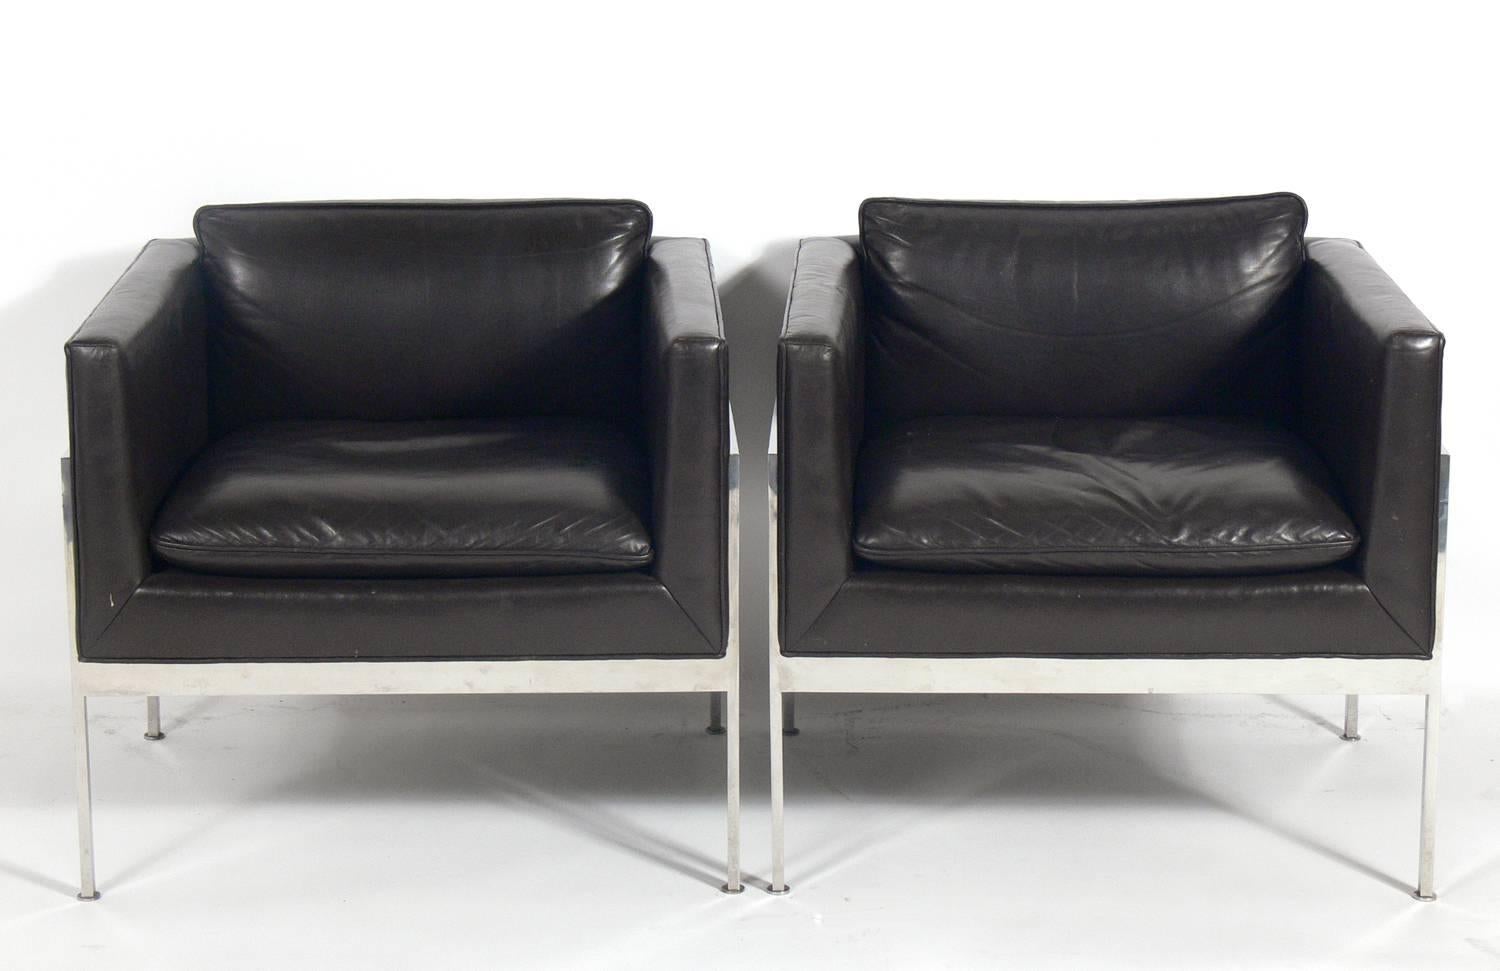 Pair of chrome and leather cube chairs attributed to Harvey Probber, American, circa 1960s. They are very well constructed with heavyweight chrome frames. They retain their original espresso brown color leather.